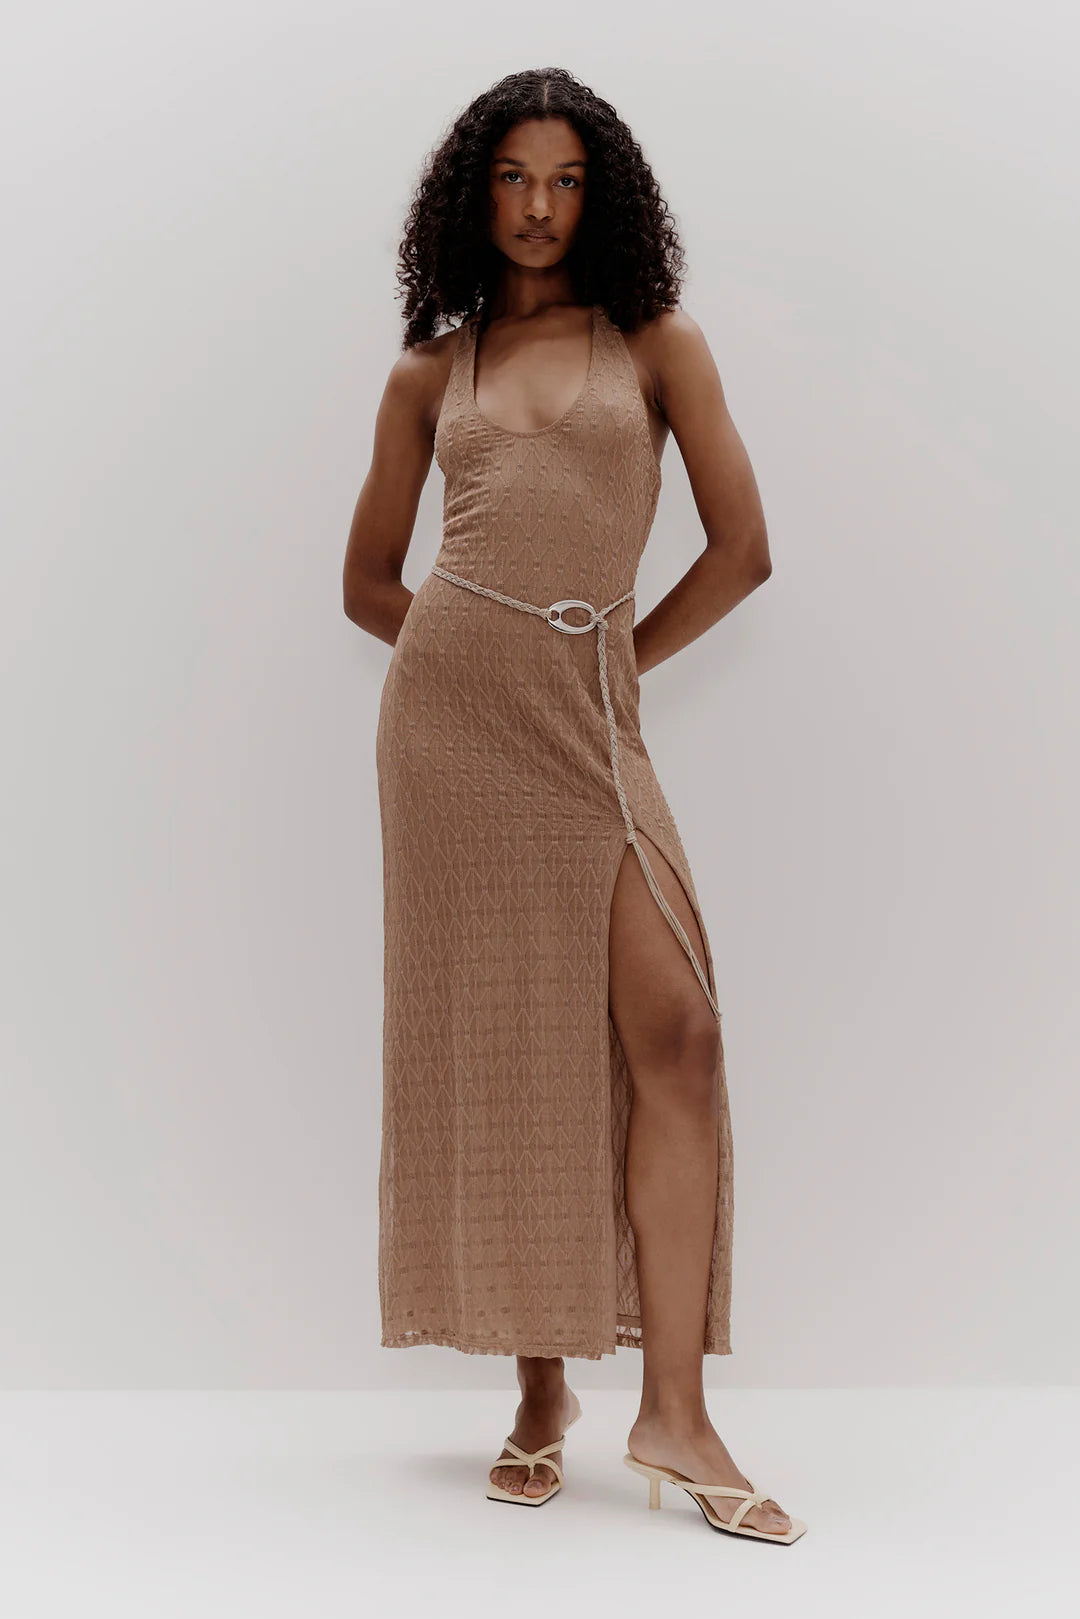 Olive Mesh Midi Dress - Barely There